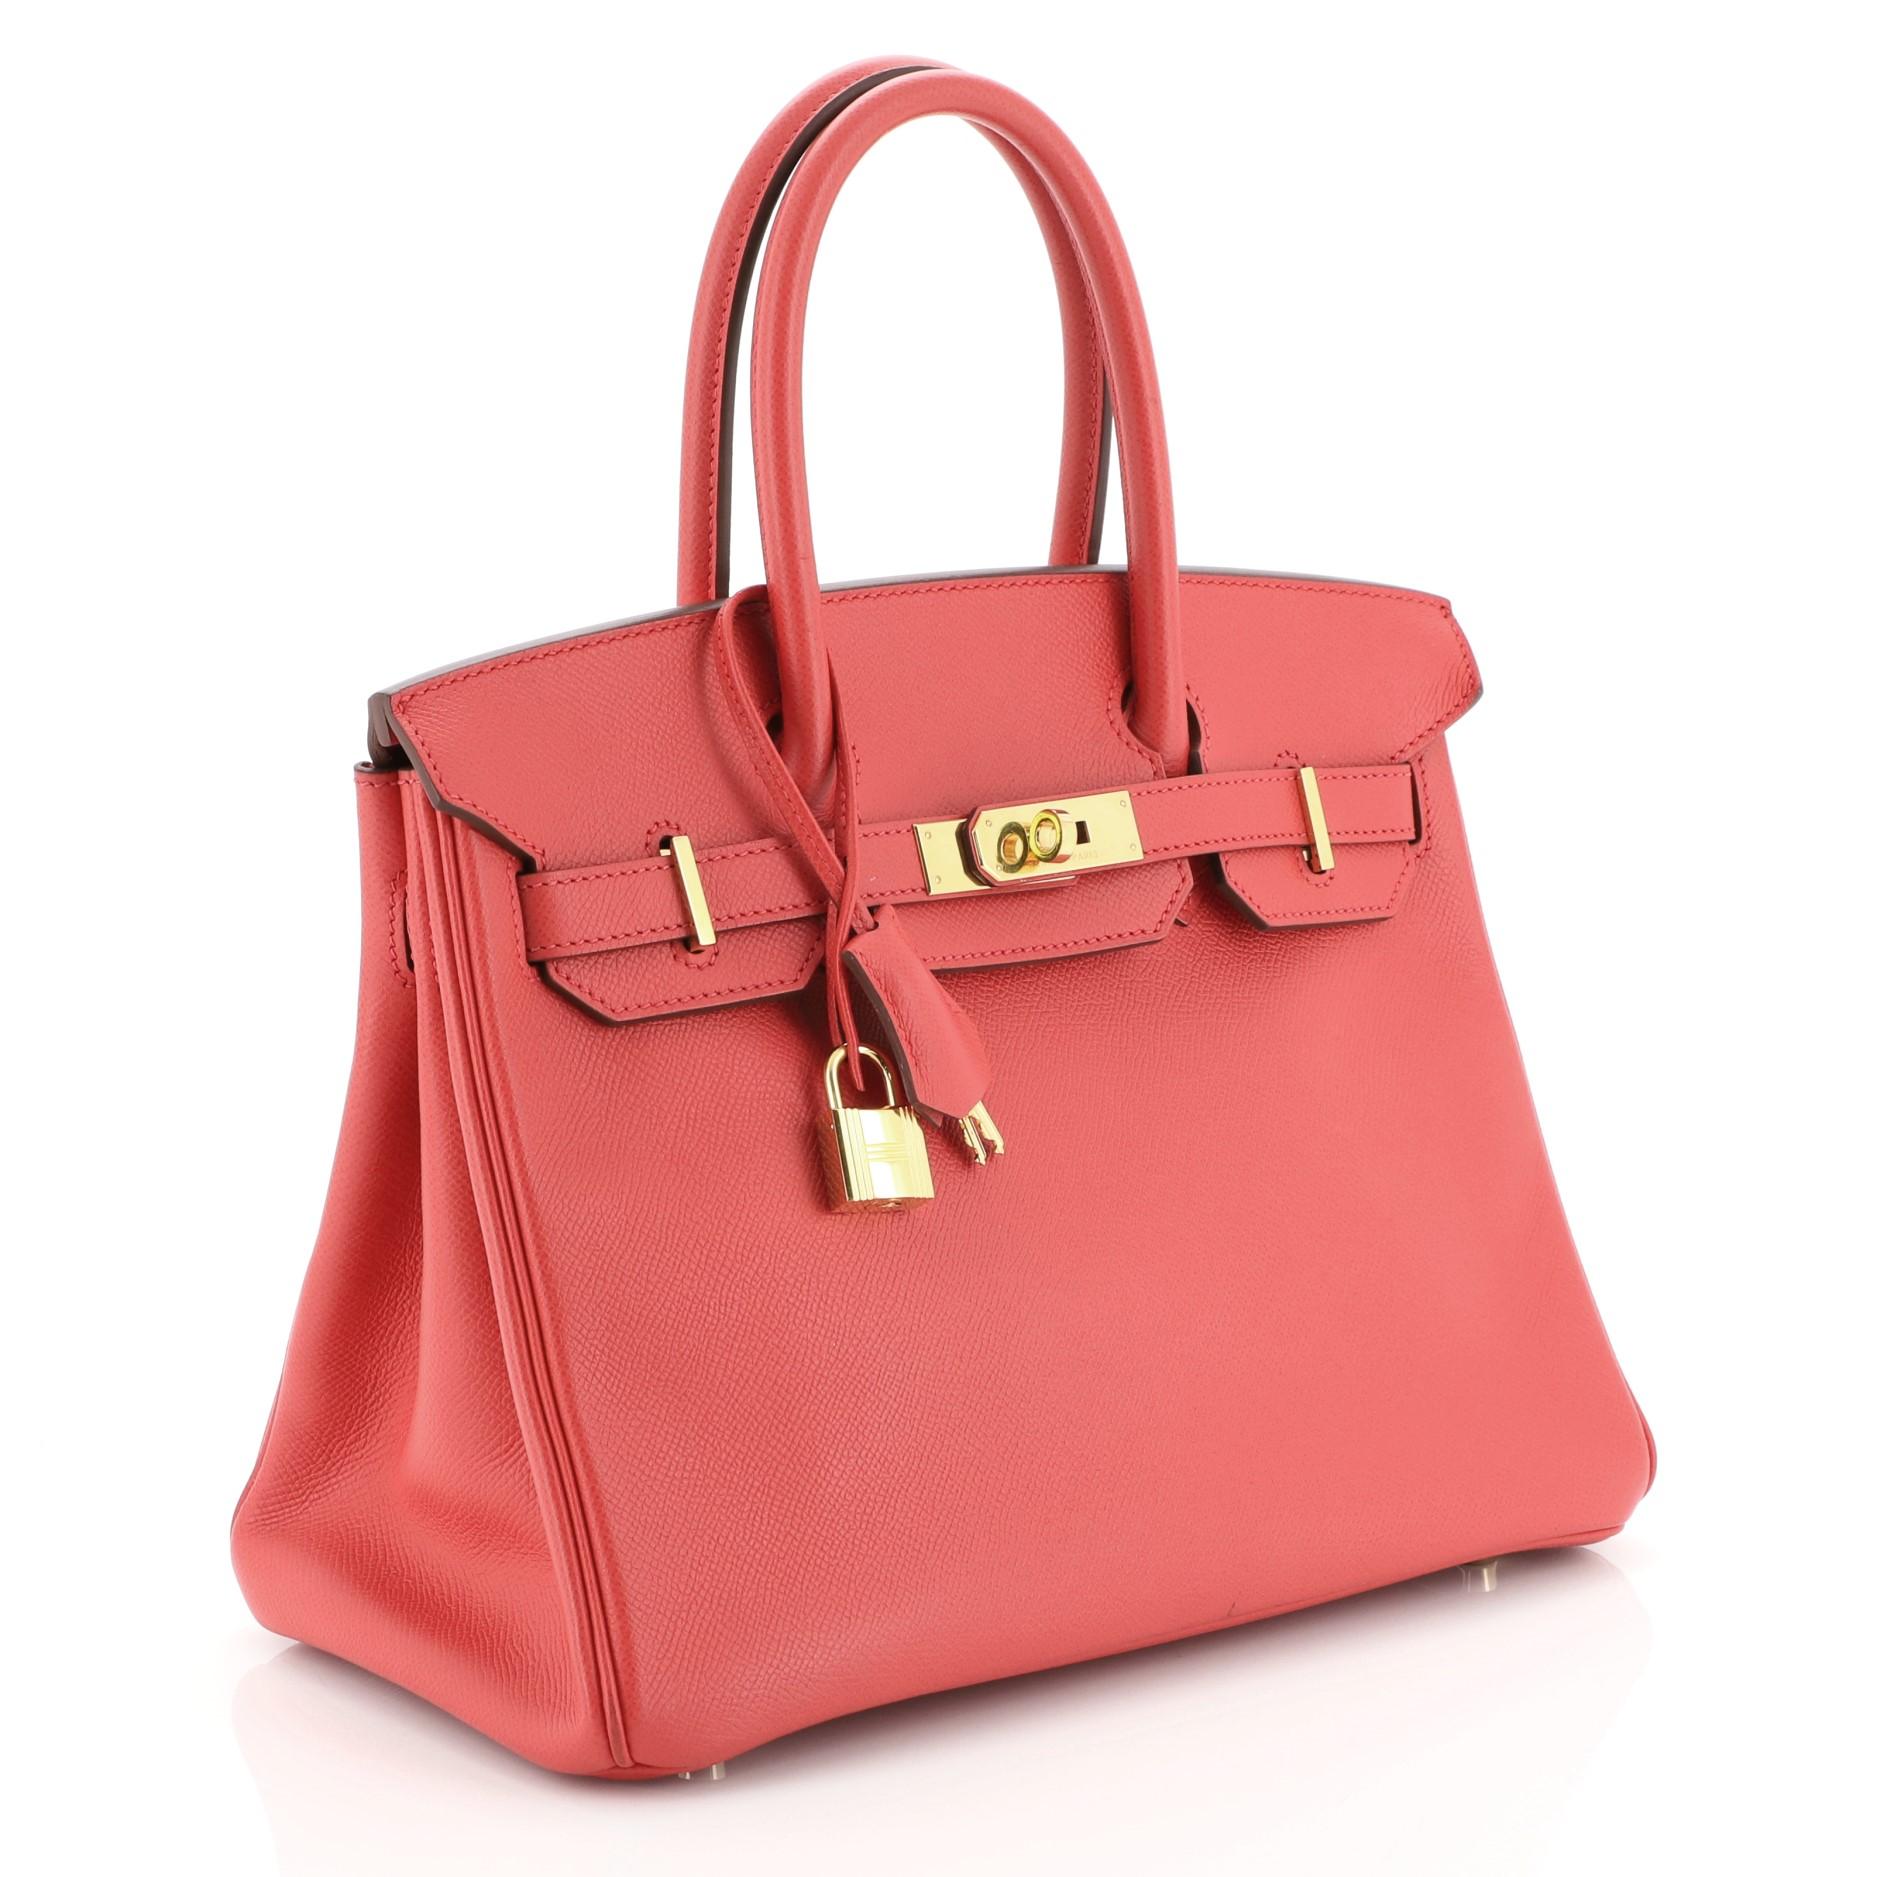 This Hermes Birkin Handbag Bougainvillea Epsom with Gold Hardware 30, crafted in Bougainvillea red Epsom leather, features dual rolled handles, frontal flap, and gold hardware. Its turn-lock closure opens to a Bougainvillea red Chevre leather